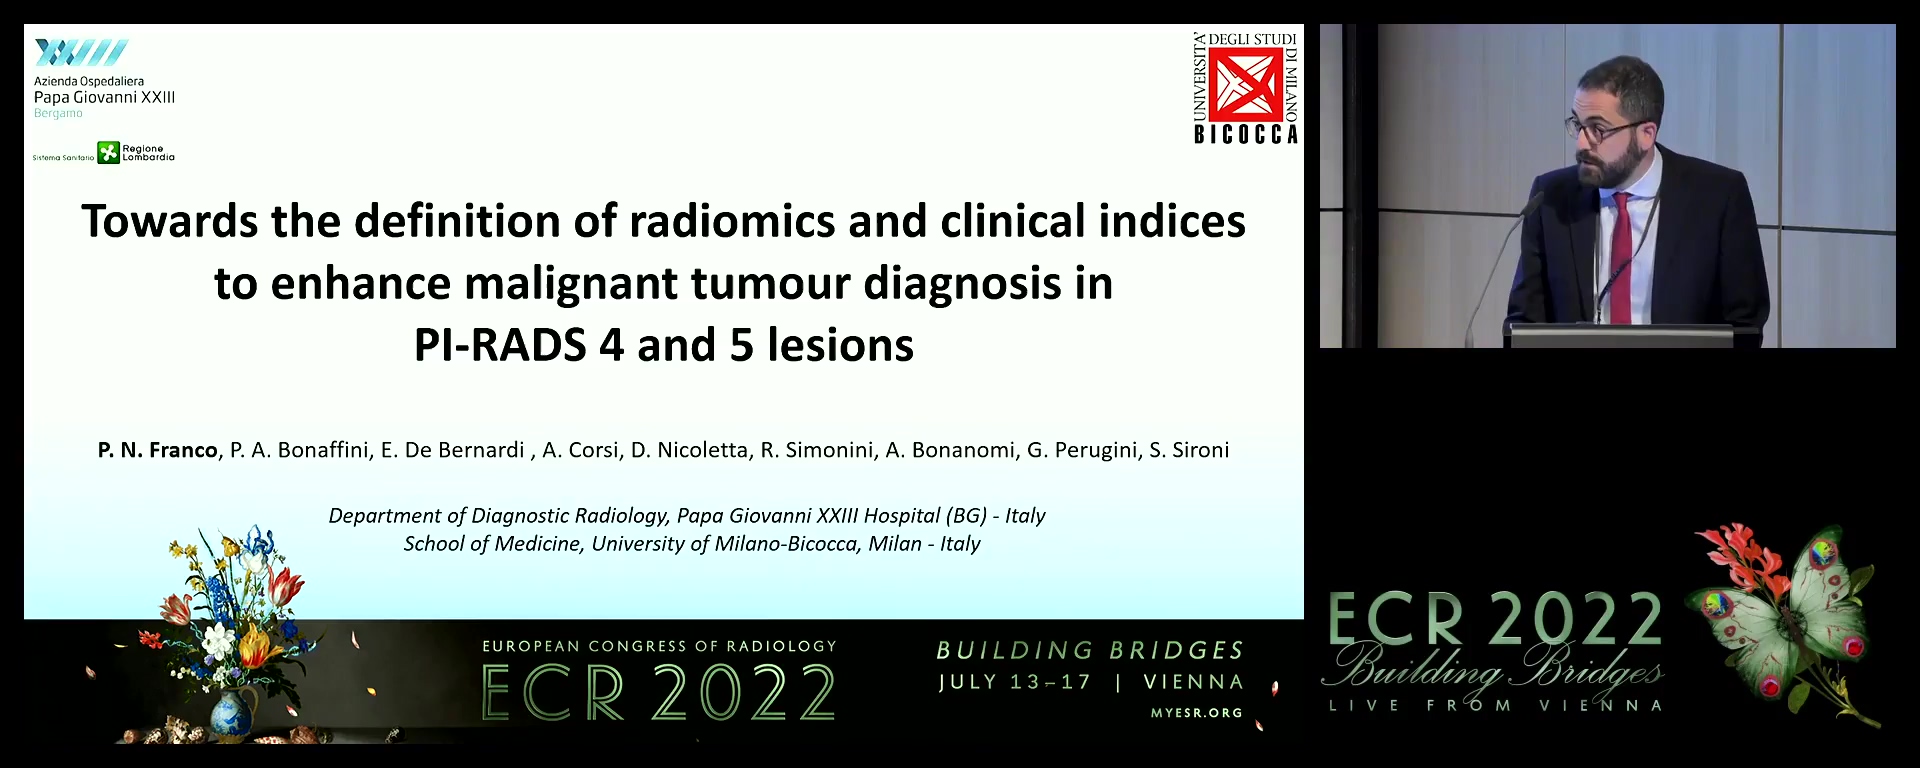 Towards the definition of radiomics and clinical indices to enhance malignant tumour diagnosis in PI-RADS 4 and 5 lesions